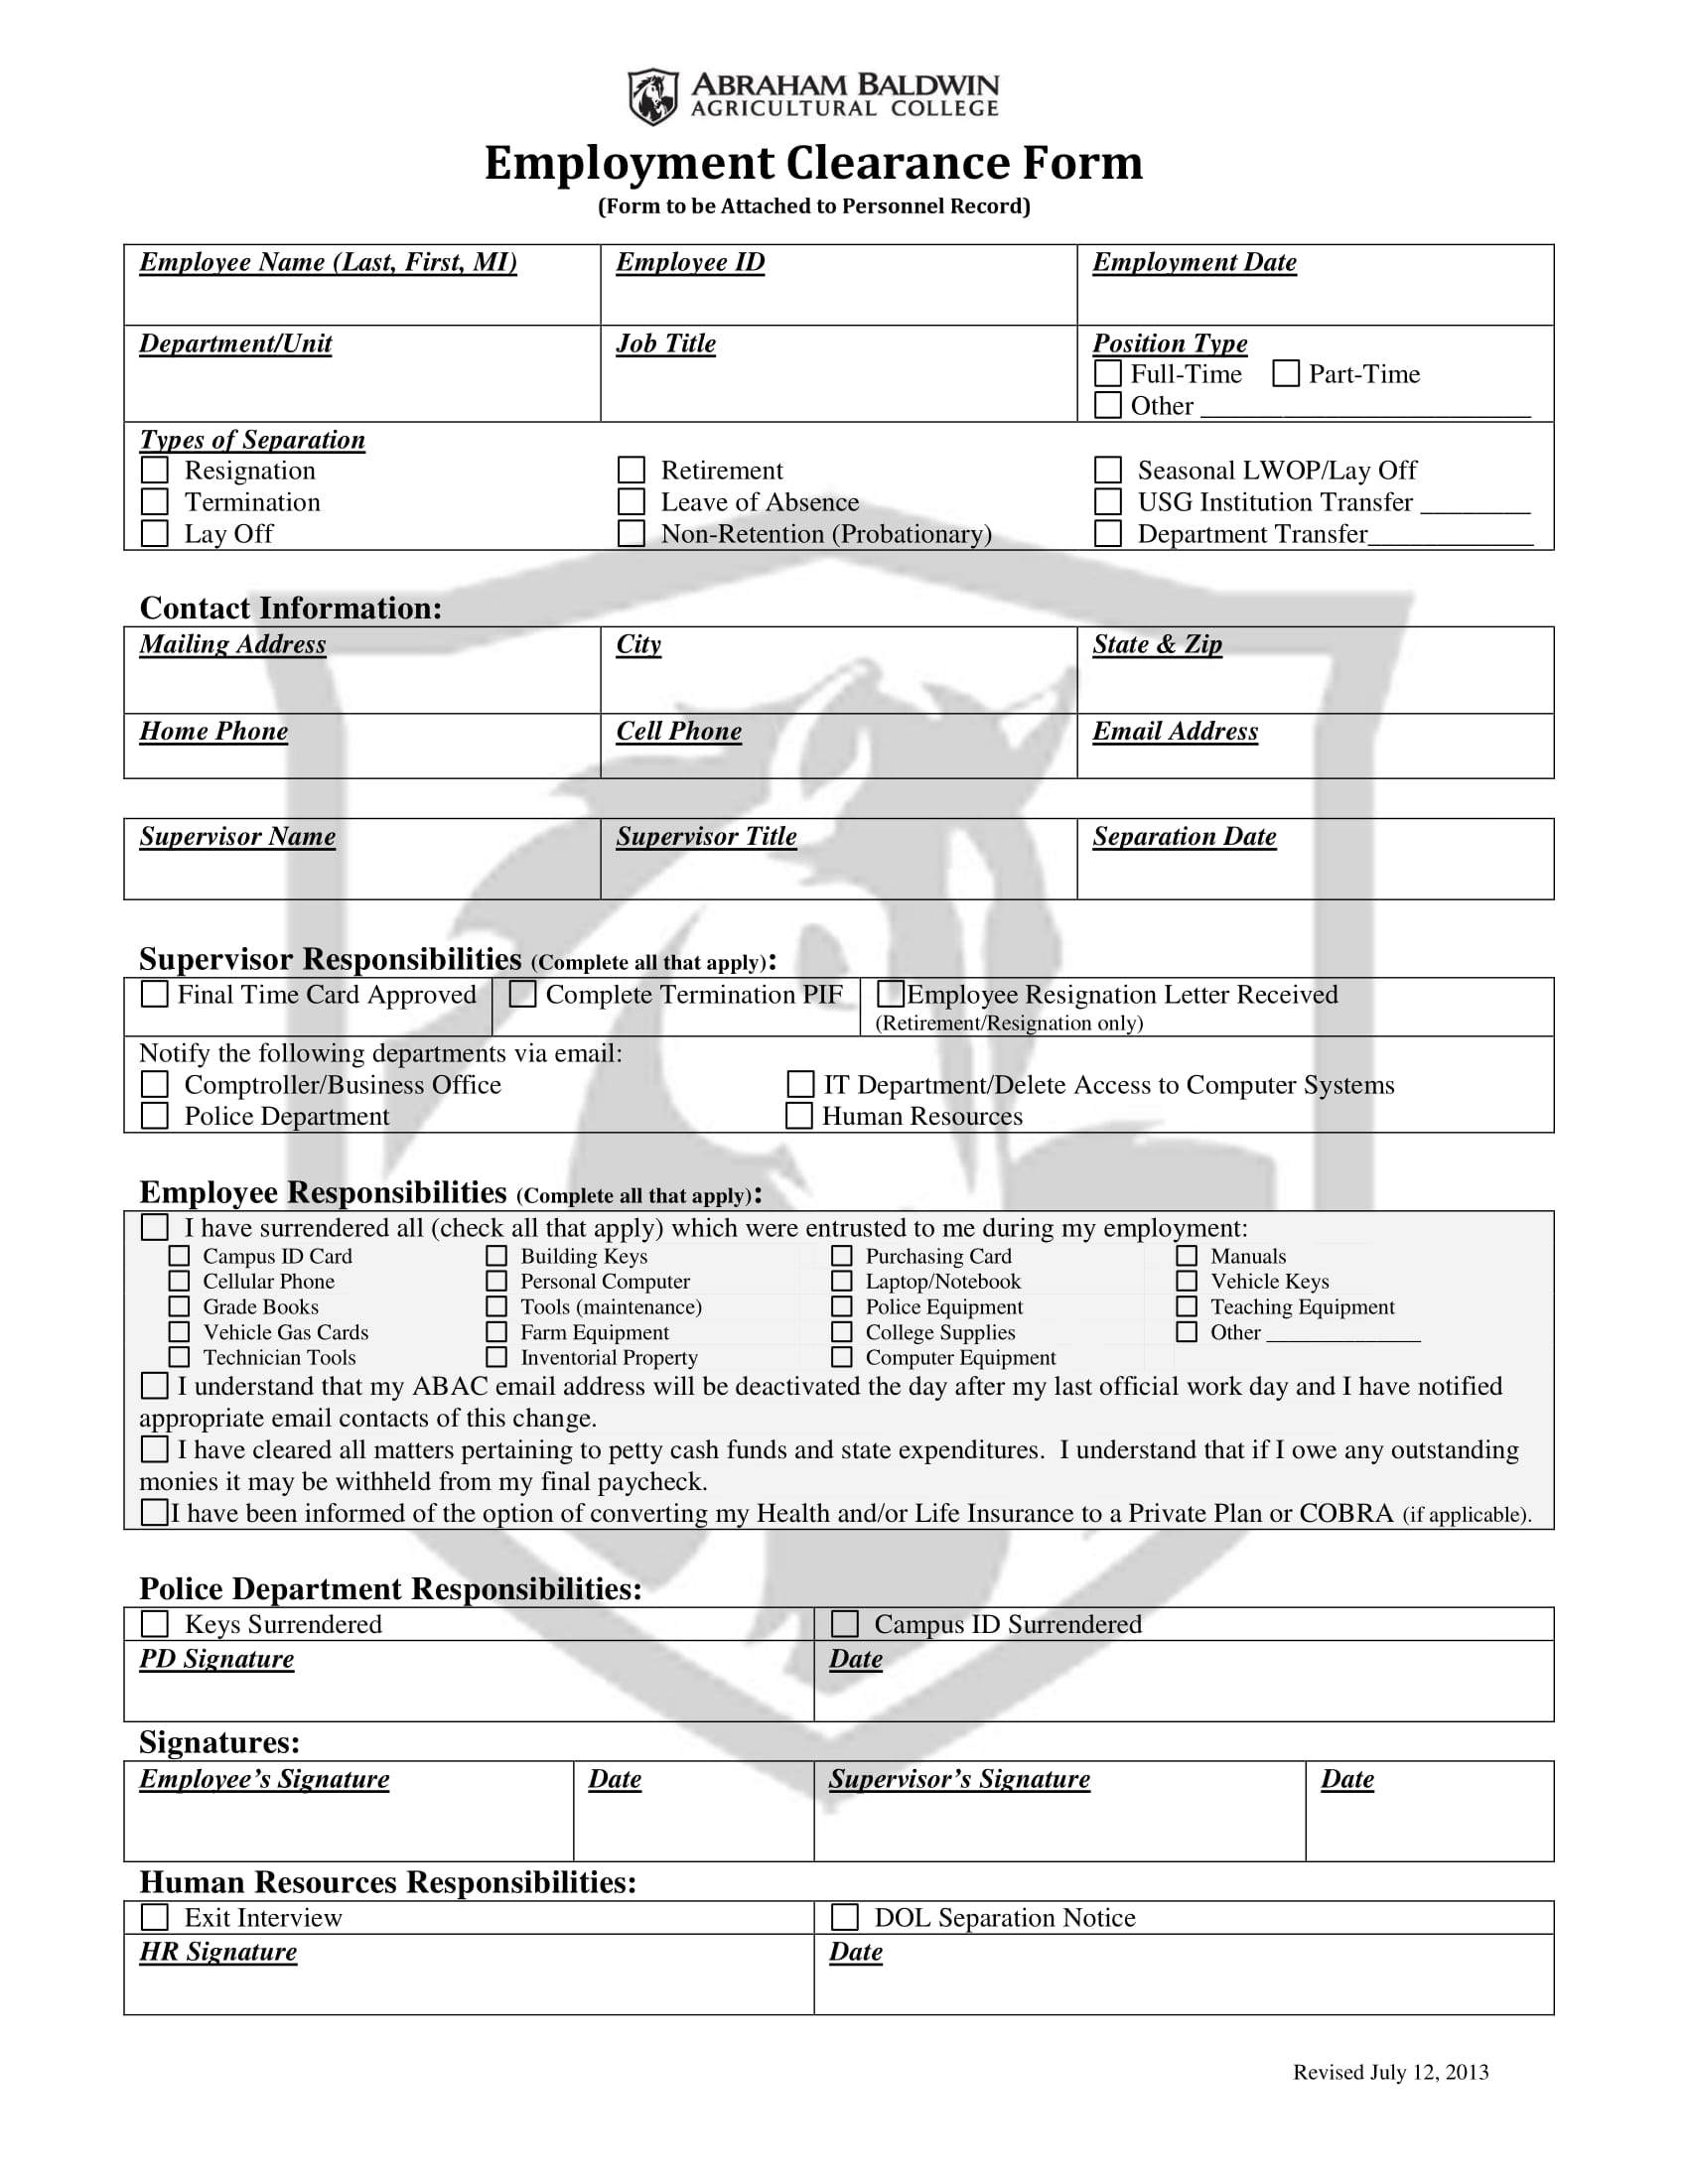 employment clearance form 1